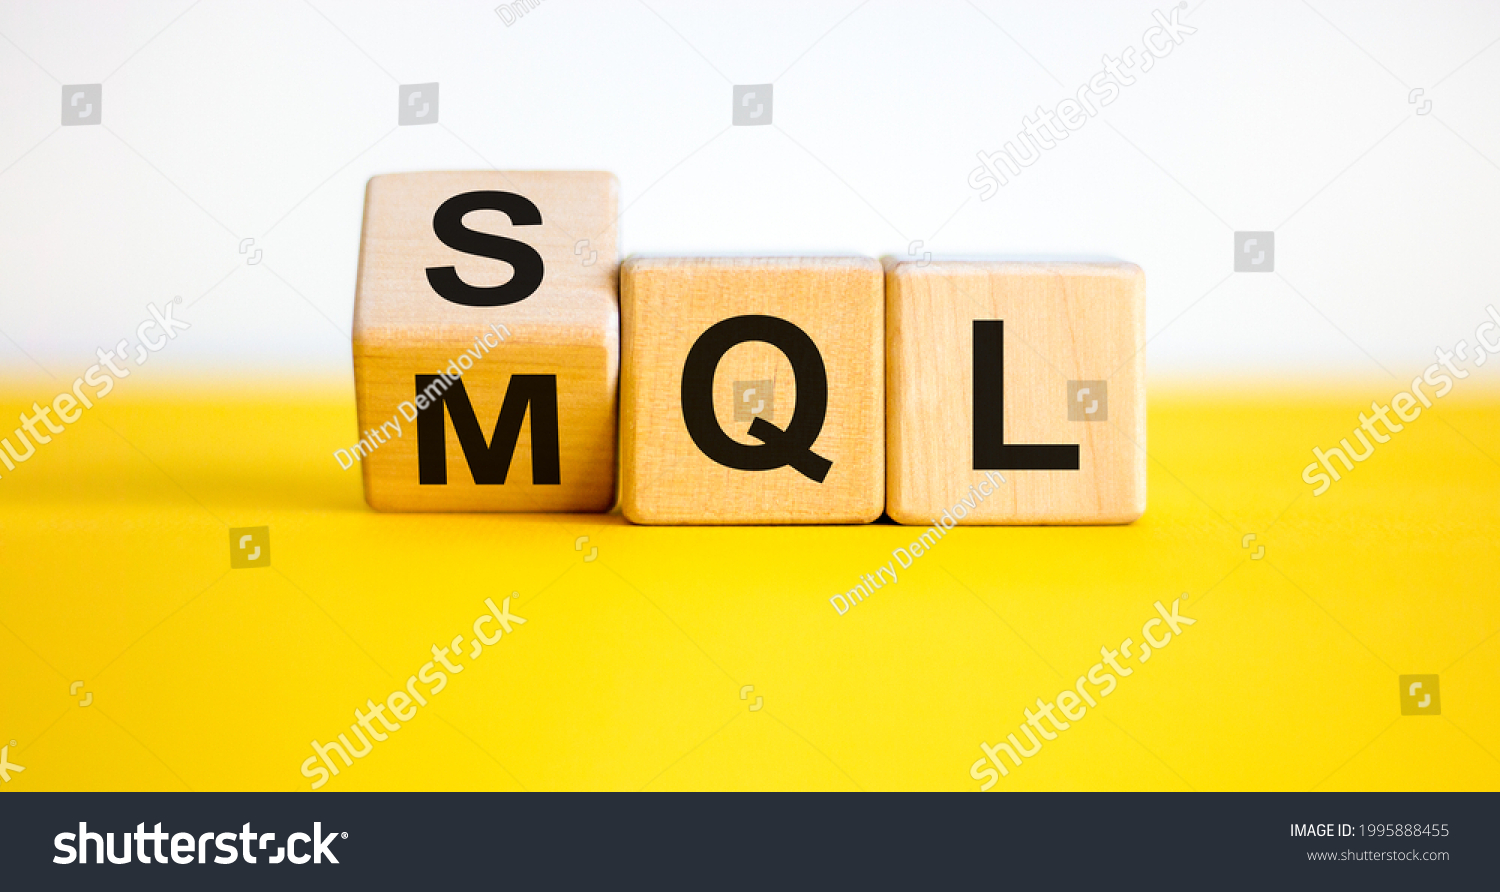 SQL or MQL symbol. Turned wooden cubes and changed words 'MQL marketing qualified lead' to 'SQL sales qualified lead'. Beautiful white background. Business and SQL or MQL concept. Copy space. #1995888455